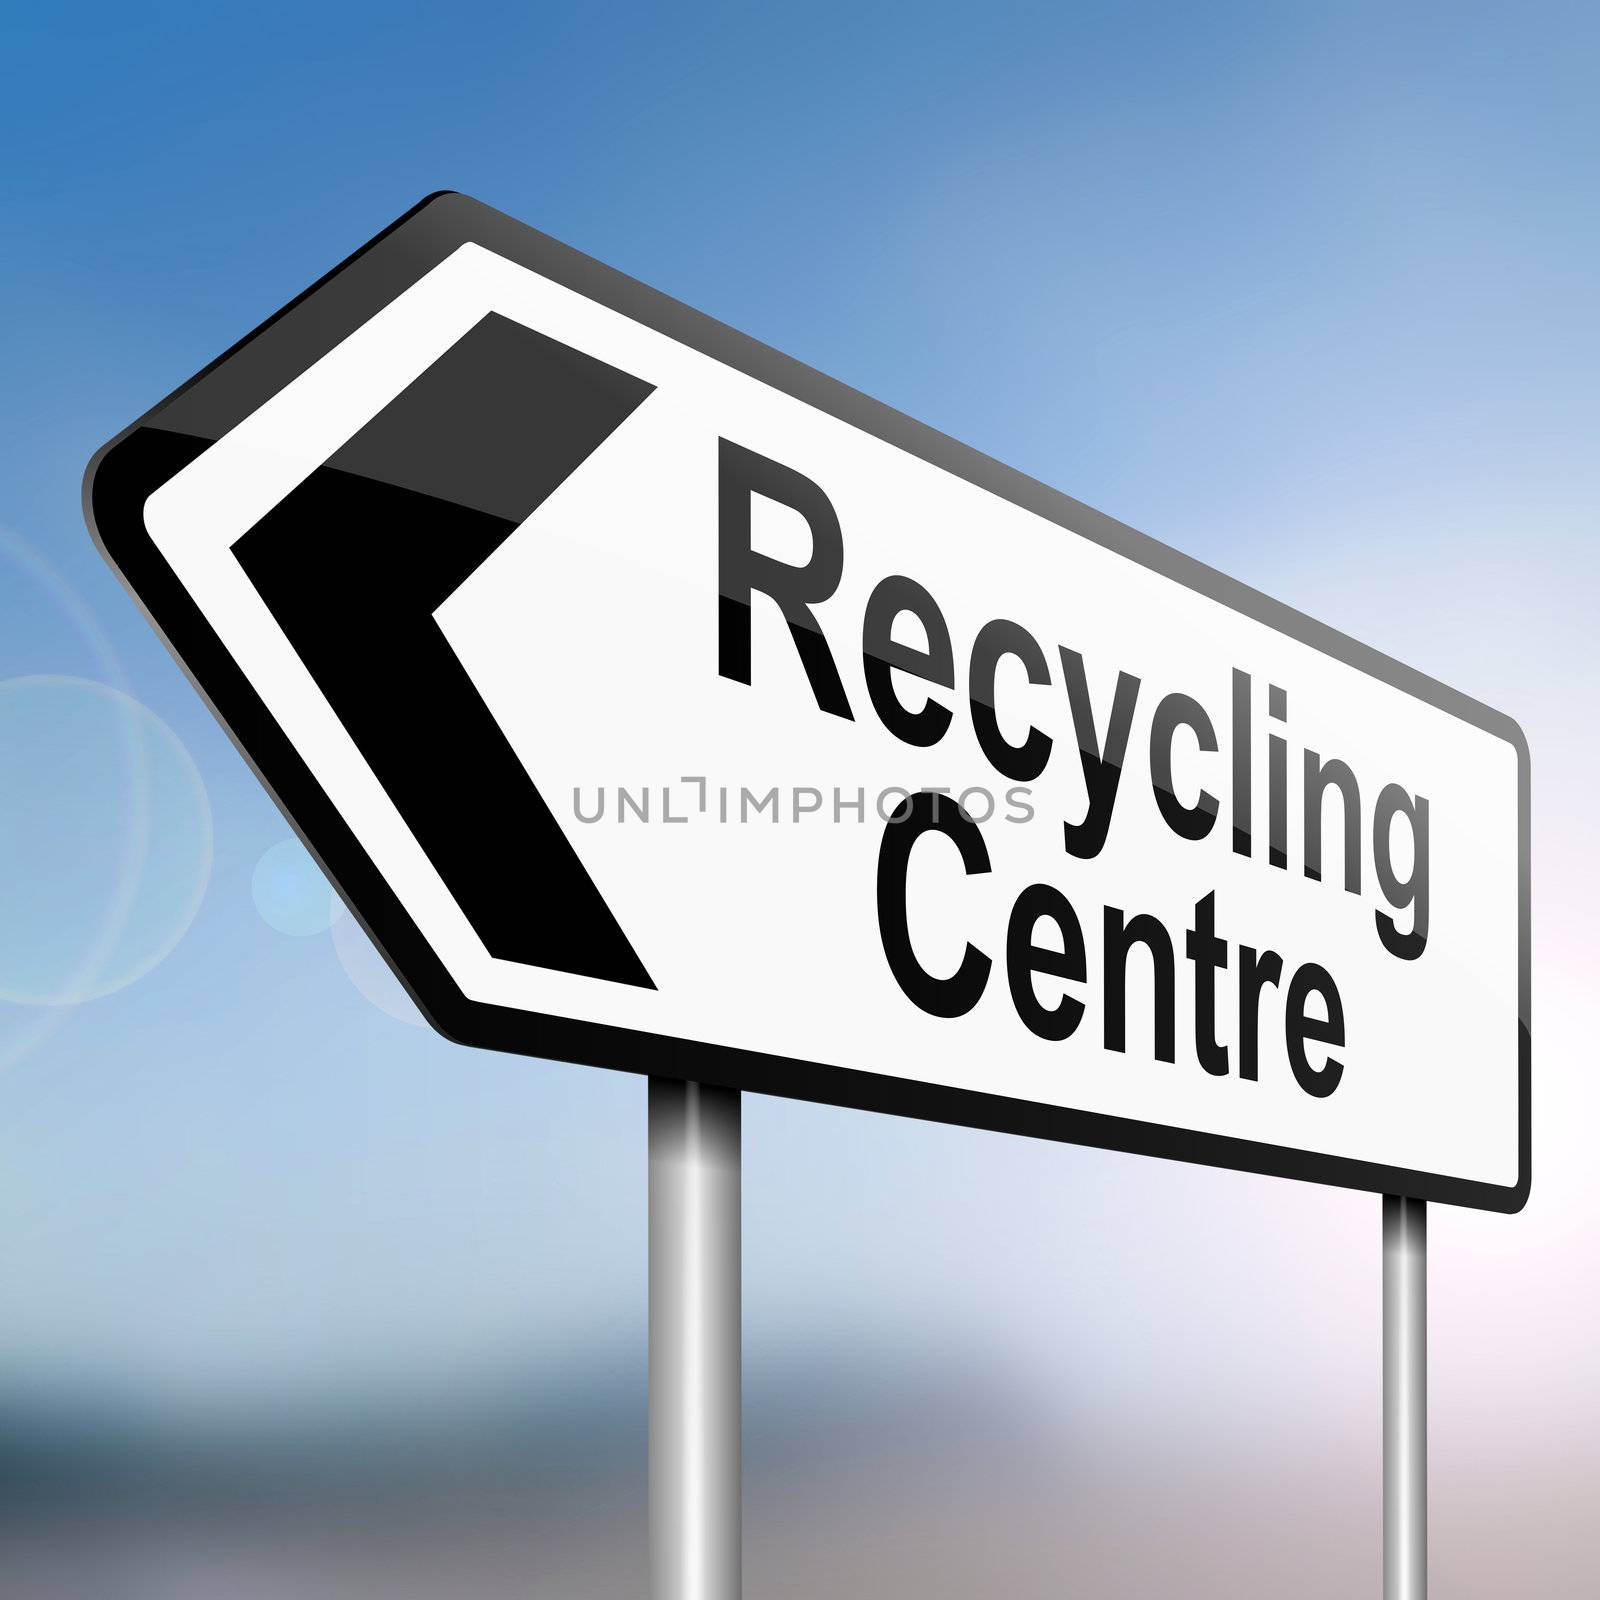 illustration depicting a sign post with directional arrow containing a recycle concept. Blurred background.